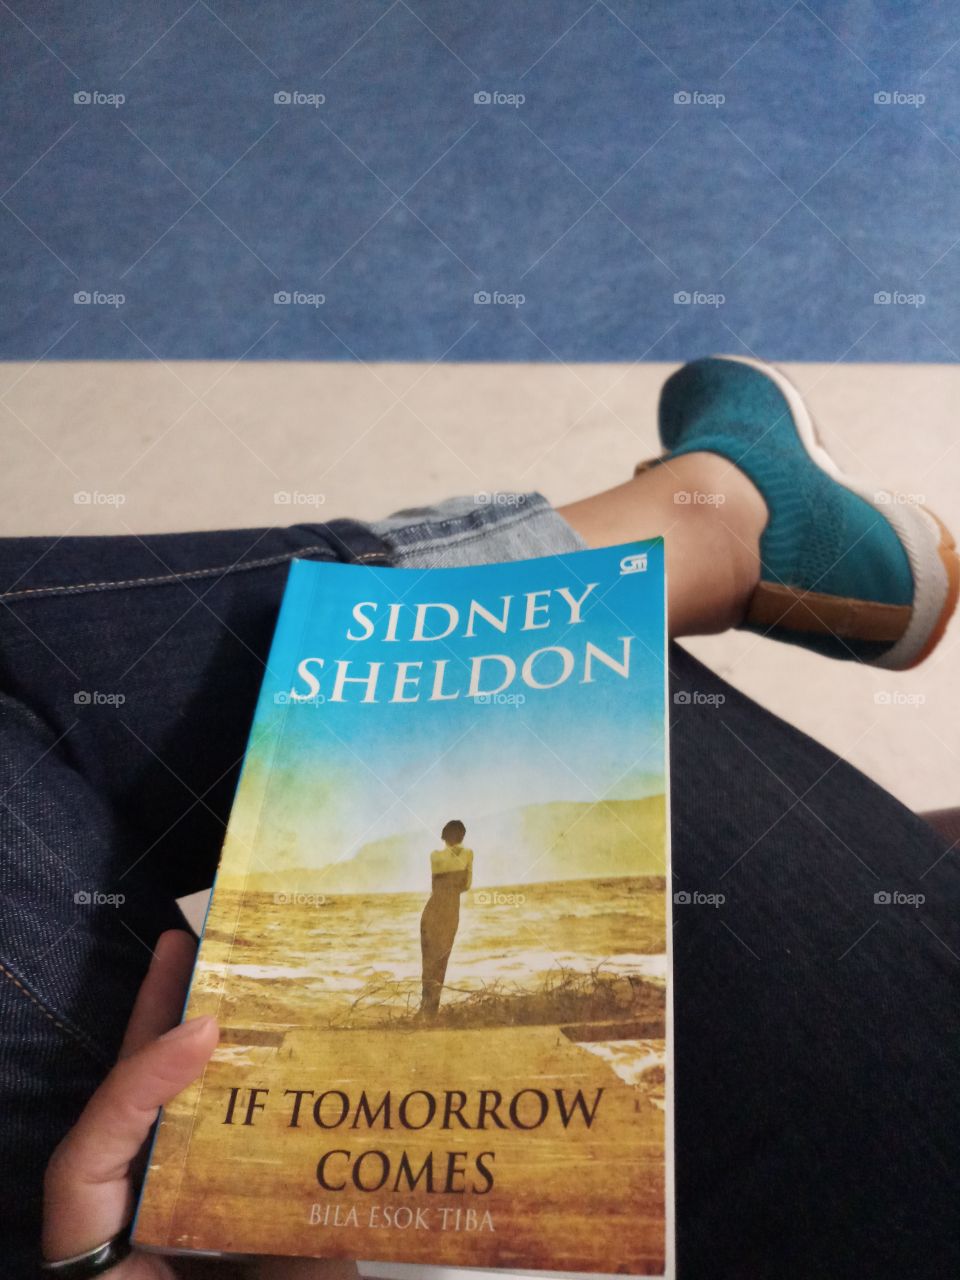 Reading book while waiting.